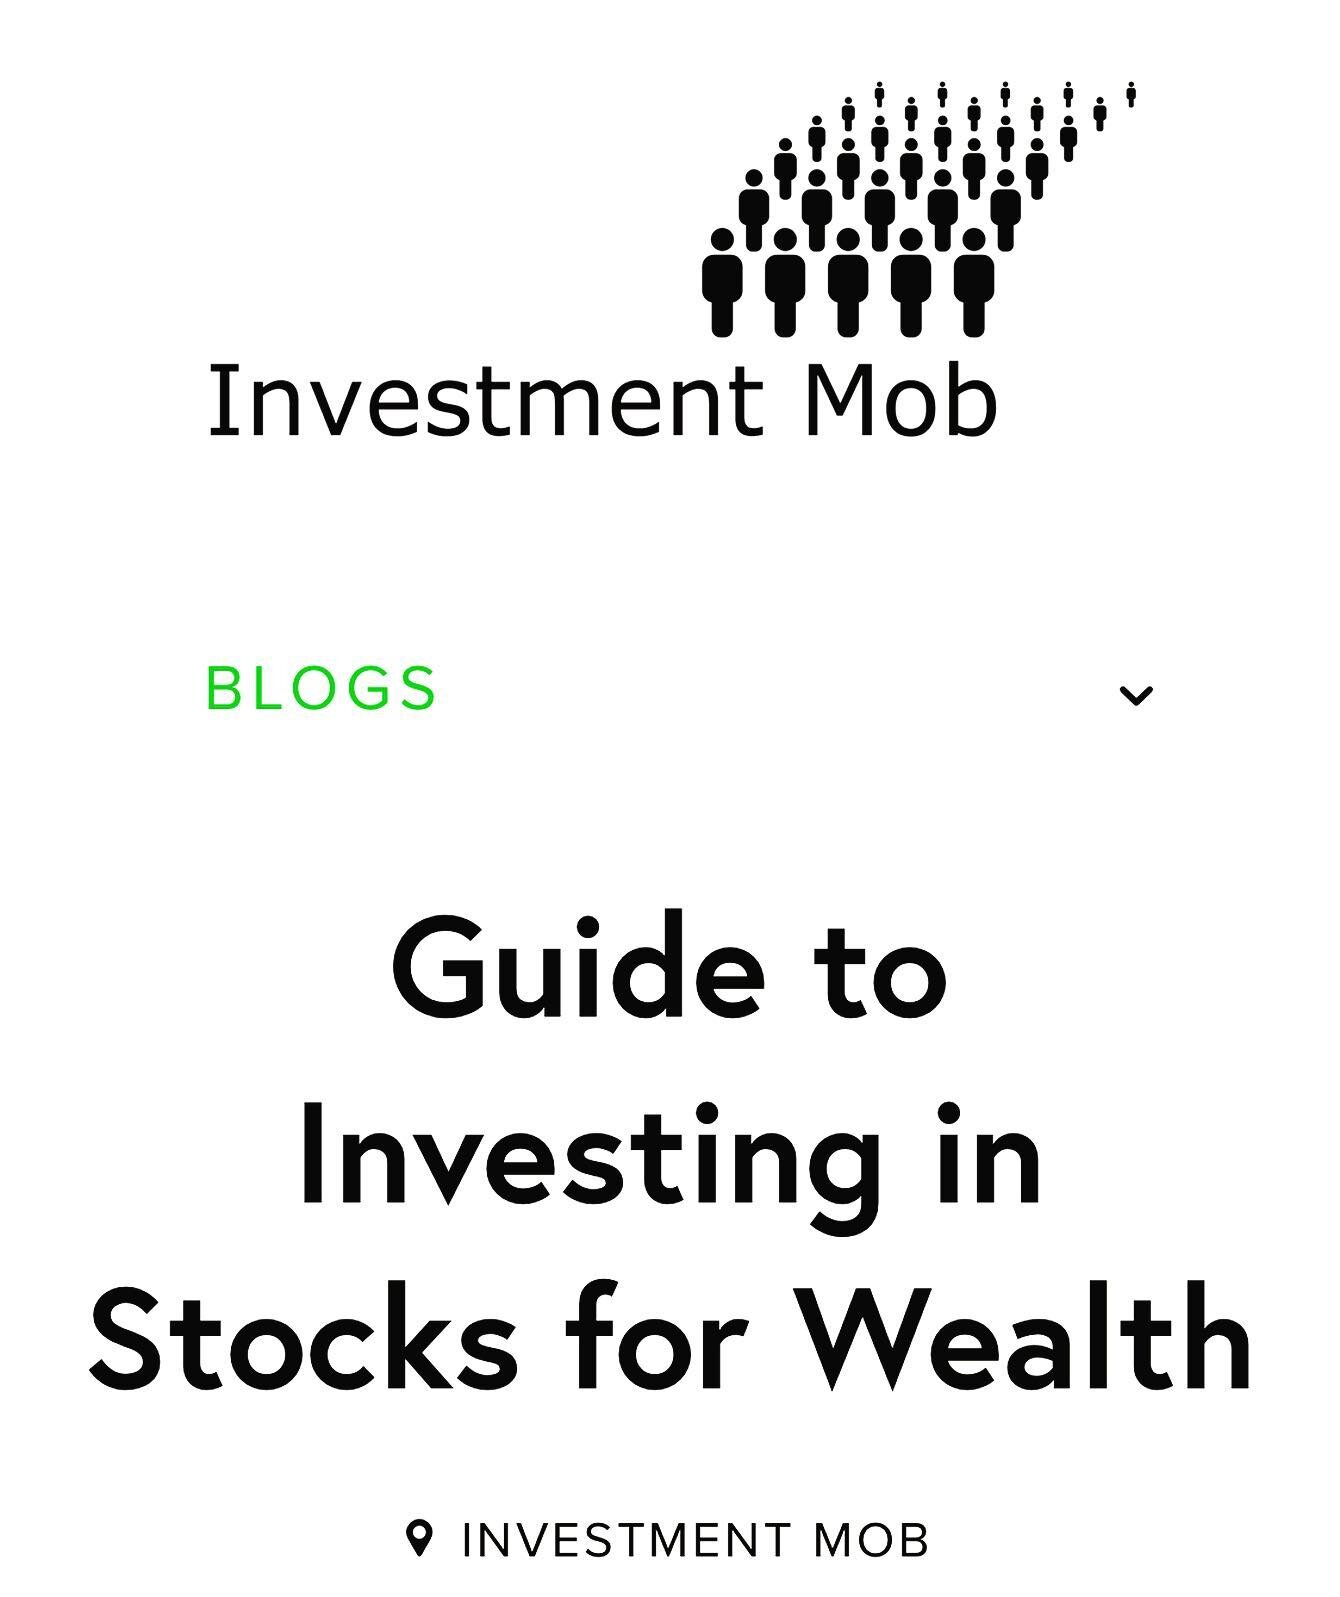 For the past 4 years Investment Mob has been helping the beginning investor turn into a Wall Street savvy trader through free content!!! Check out the latest article &ldquo;Guide to Investing in Stocks for Wealth&rdquo; at investmentmob.com